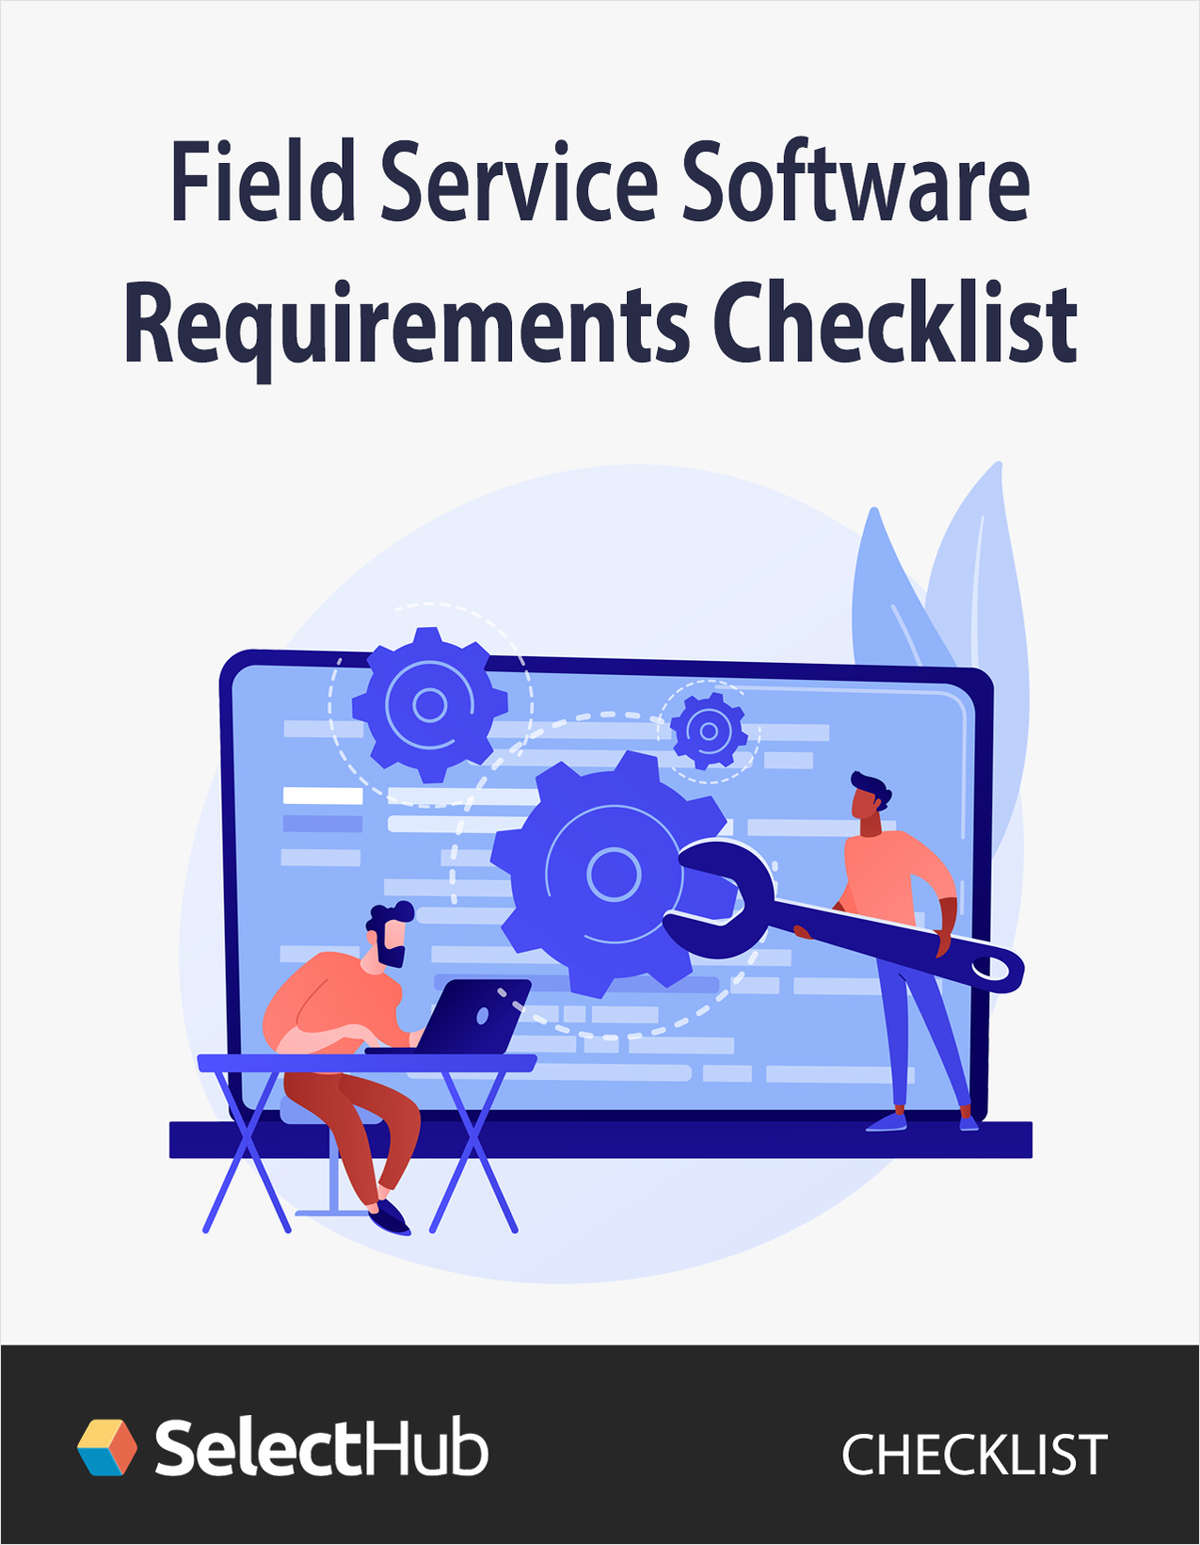 Field Service Management Software Requirements Checklist for 2022